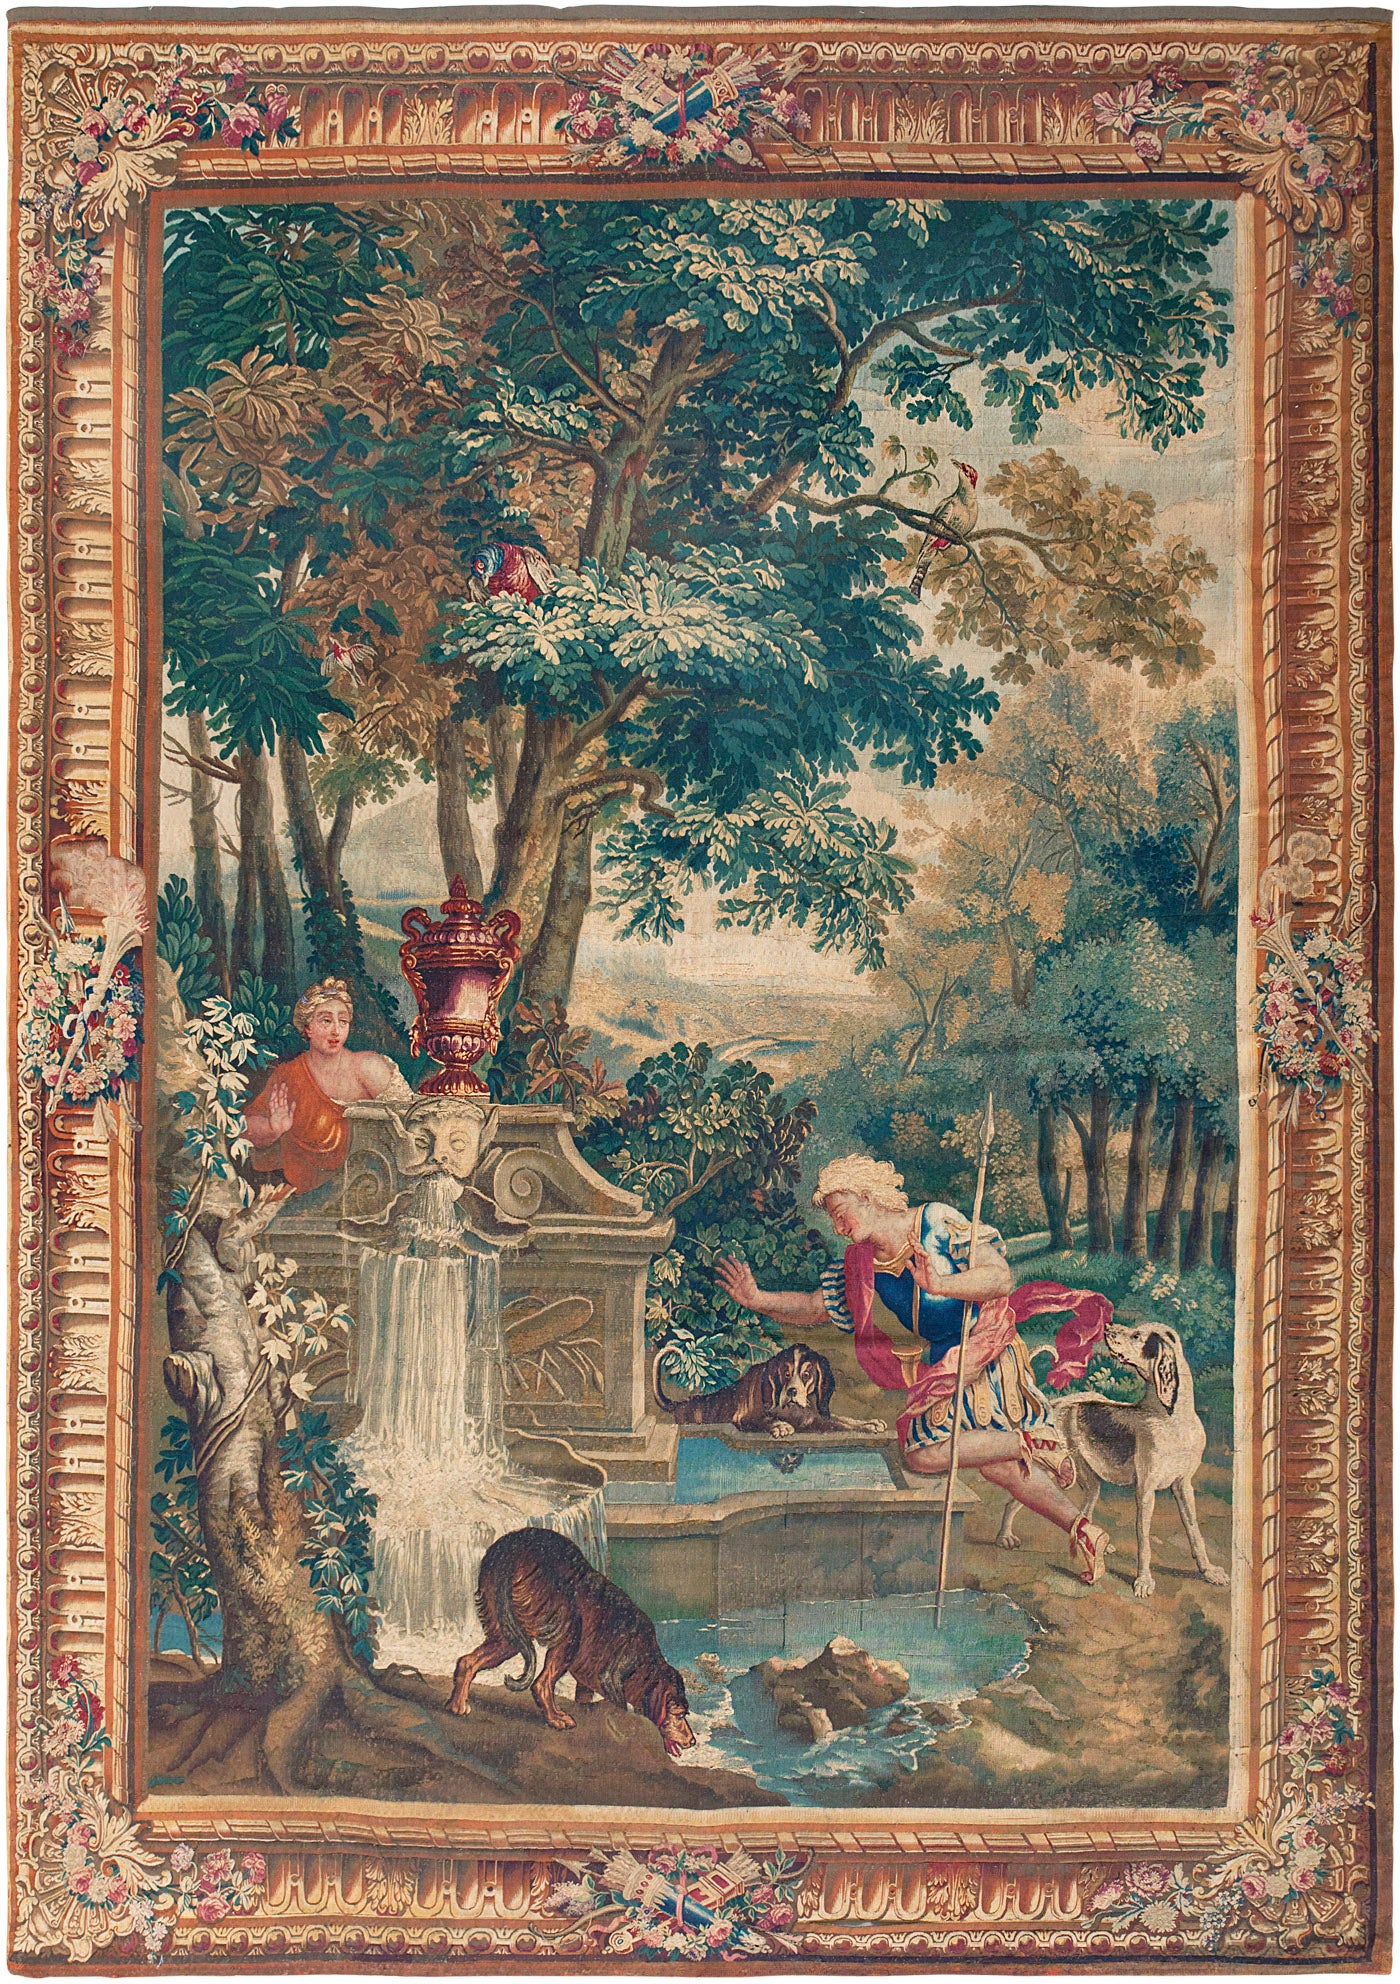 Antique 18th Century French Mythological Tapestry